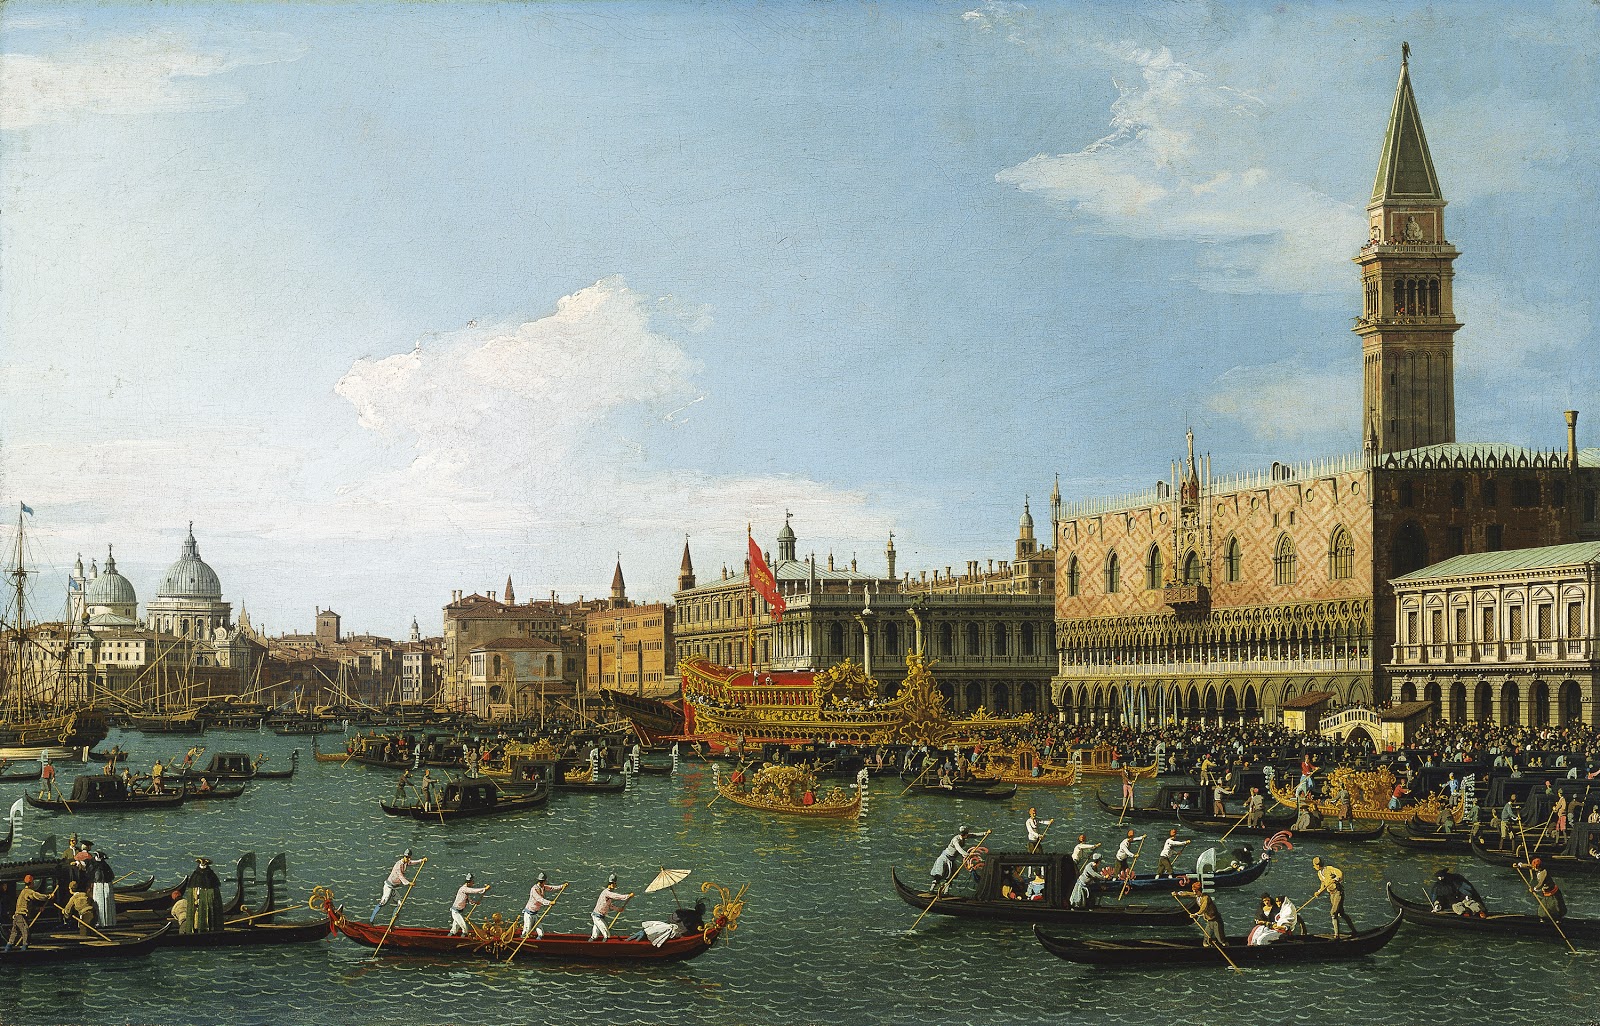 Canaletto-1697-1768 (37).jpg